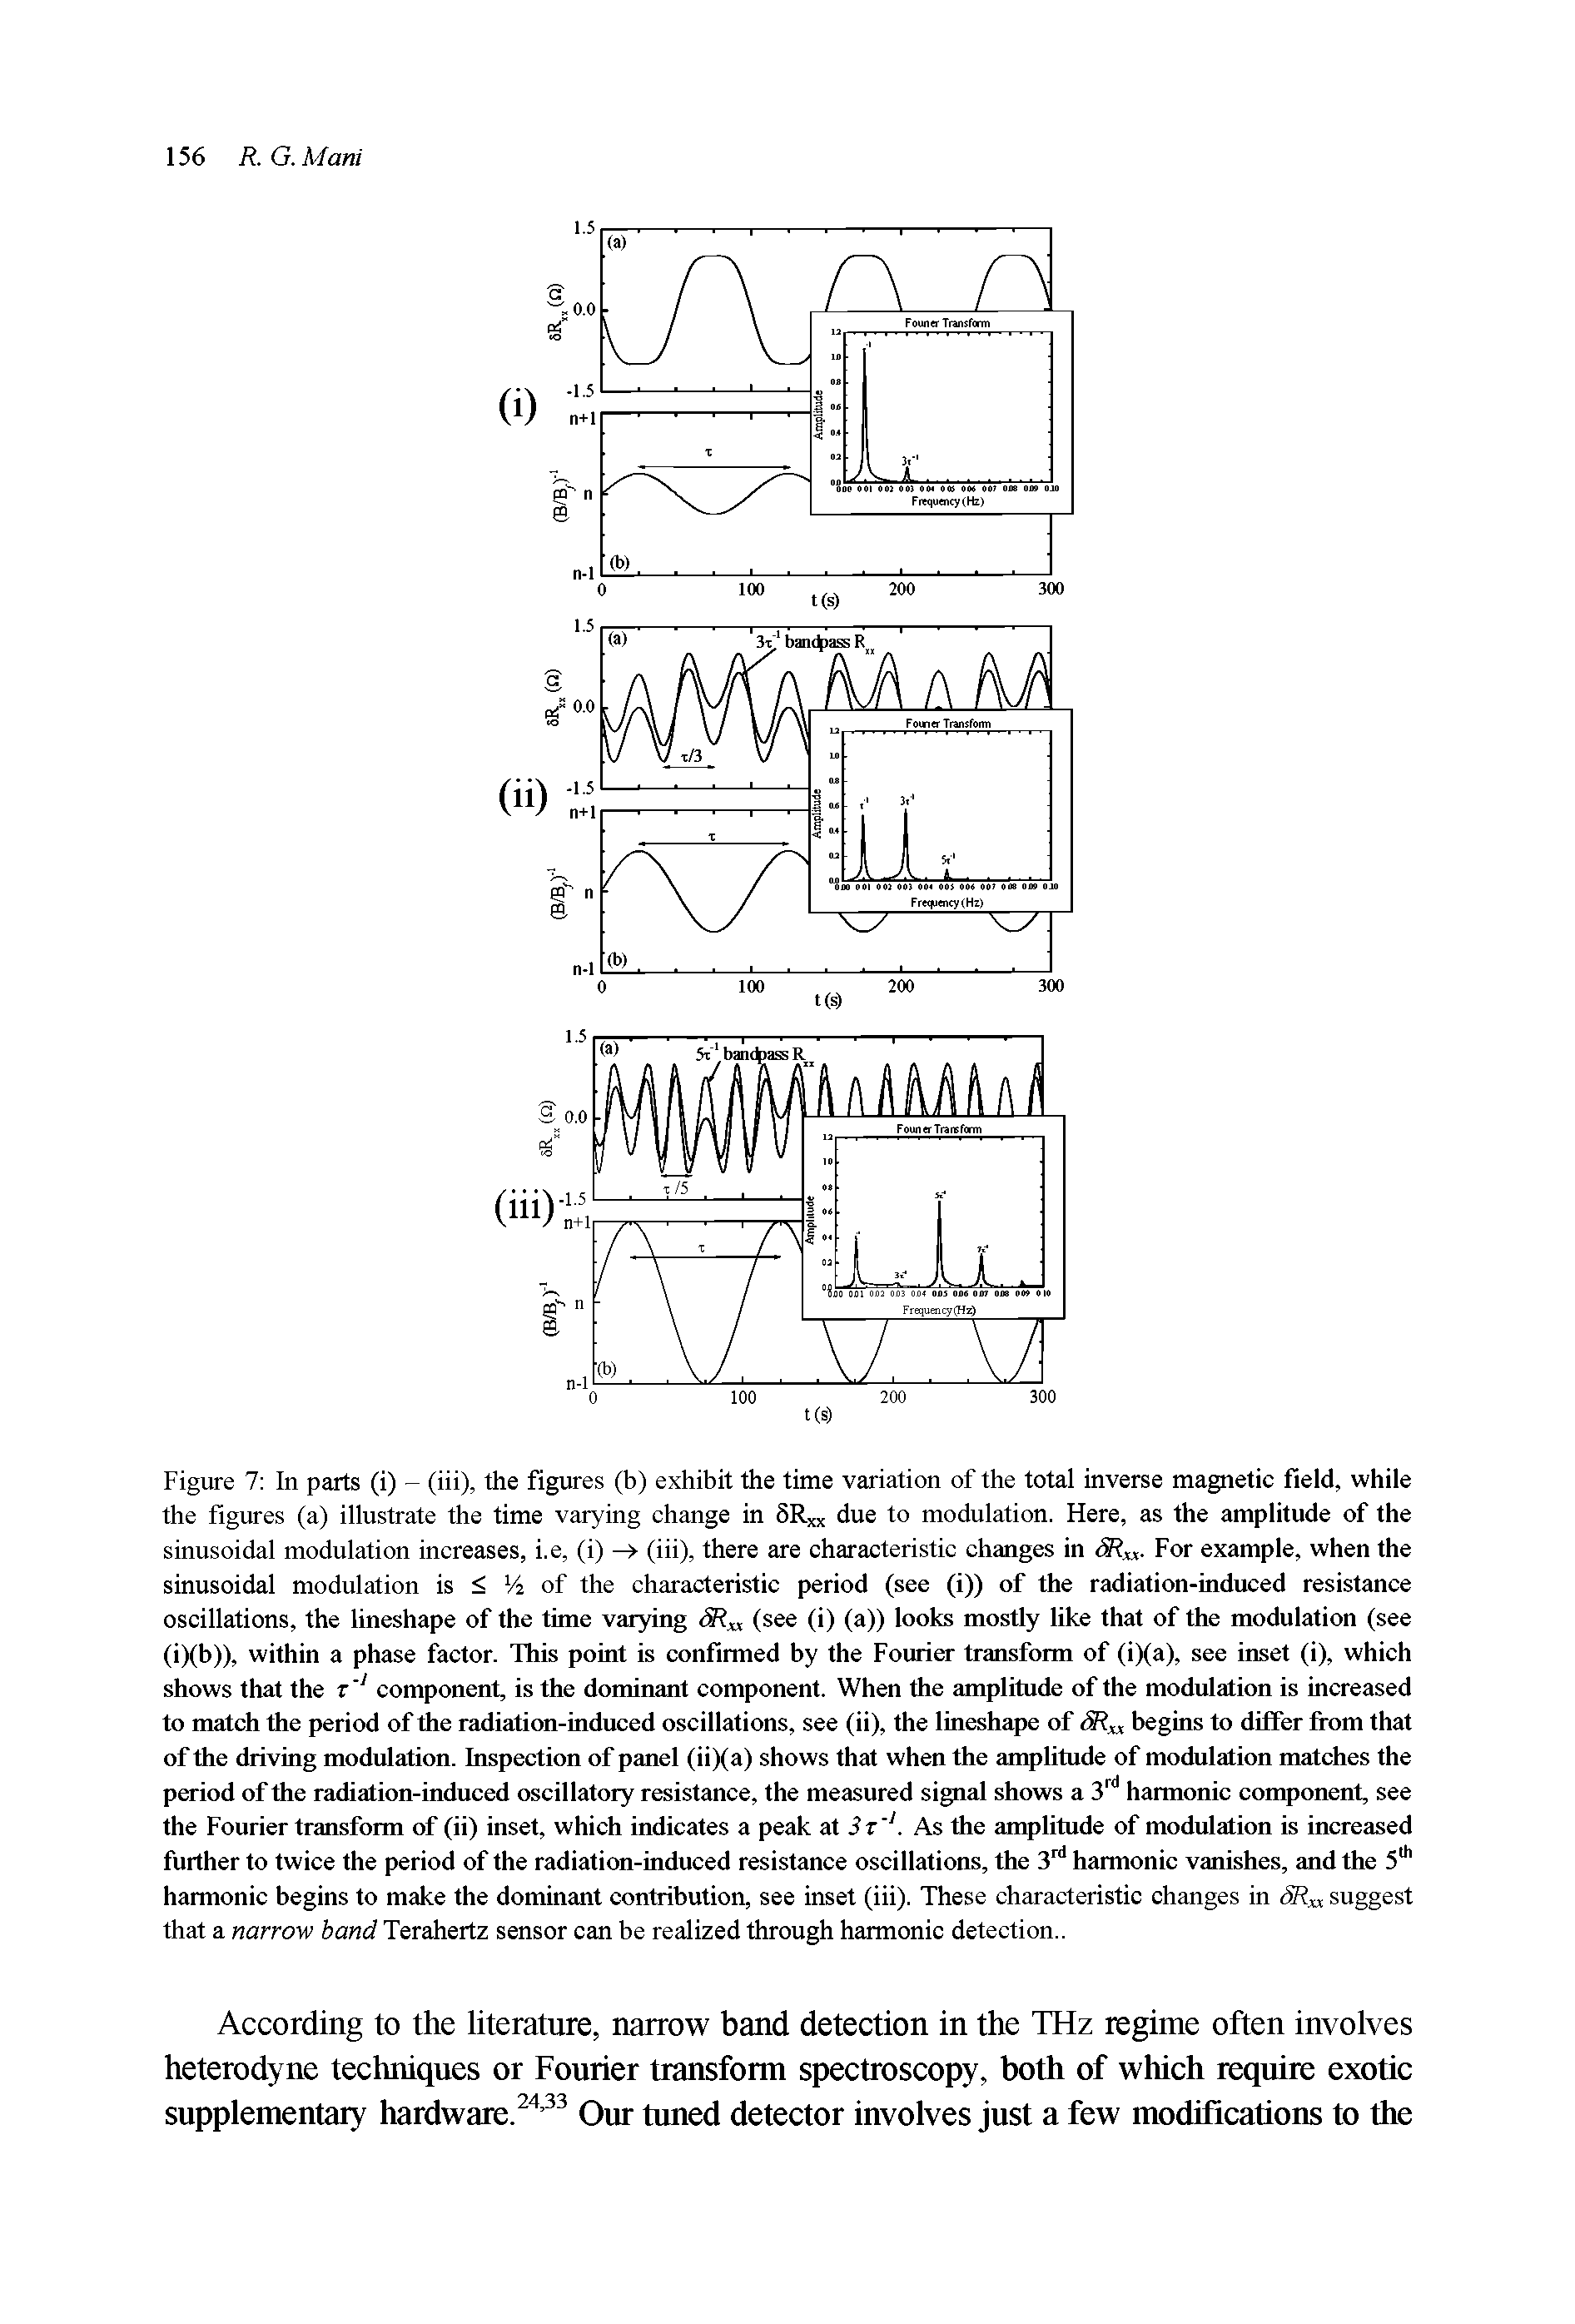 Figure 7 In parts (i) - (iii), the figures (b) exhibit the time variation of the total inverse magnetic field, while the figures (a) illustrate the time varying change in 5Rxx due to modulation. Here, as the amplitude of the sinusoidal modulation increases, i.e, (i) (iii), there are characteristic changes in For example, when the sinusoidal modulation is < V2 of the characteristic period (see (i)) of the radiation-induced resistance oscillations, the lineshape of the time varying (see (i) (a)) looks mostly like that of the modulation (see (i)(b)), within a phase factor. This point is confirmed by the Fourier transform of (i)(a), see inset (i), which shows that the t component, is the dominant component. When the amplitude of the modulation is increased to match the period of the radiation-induced oscillations, see (ii), the lineshape of begins to differ from that...